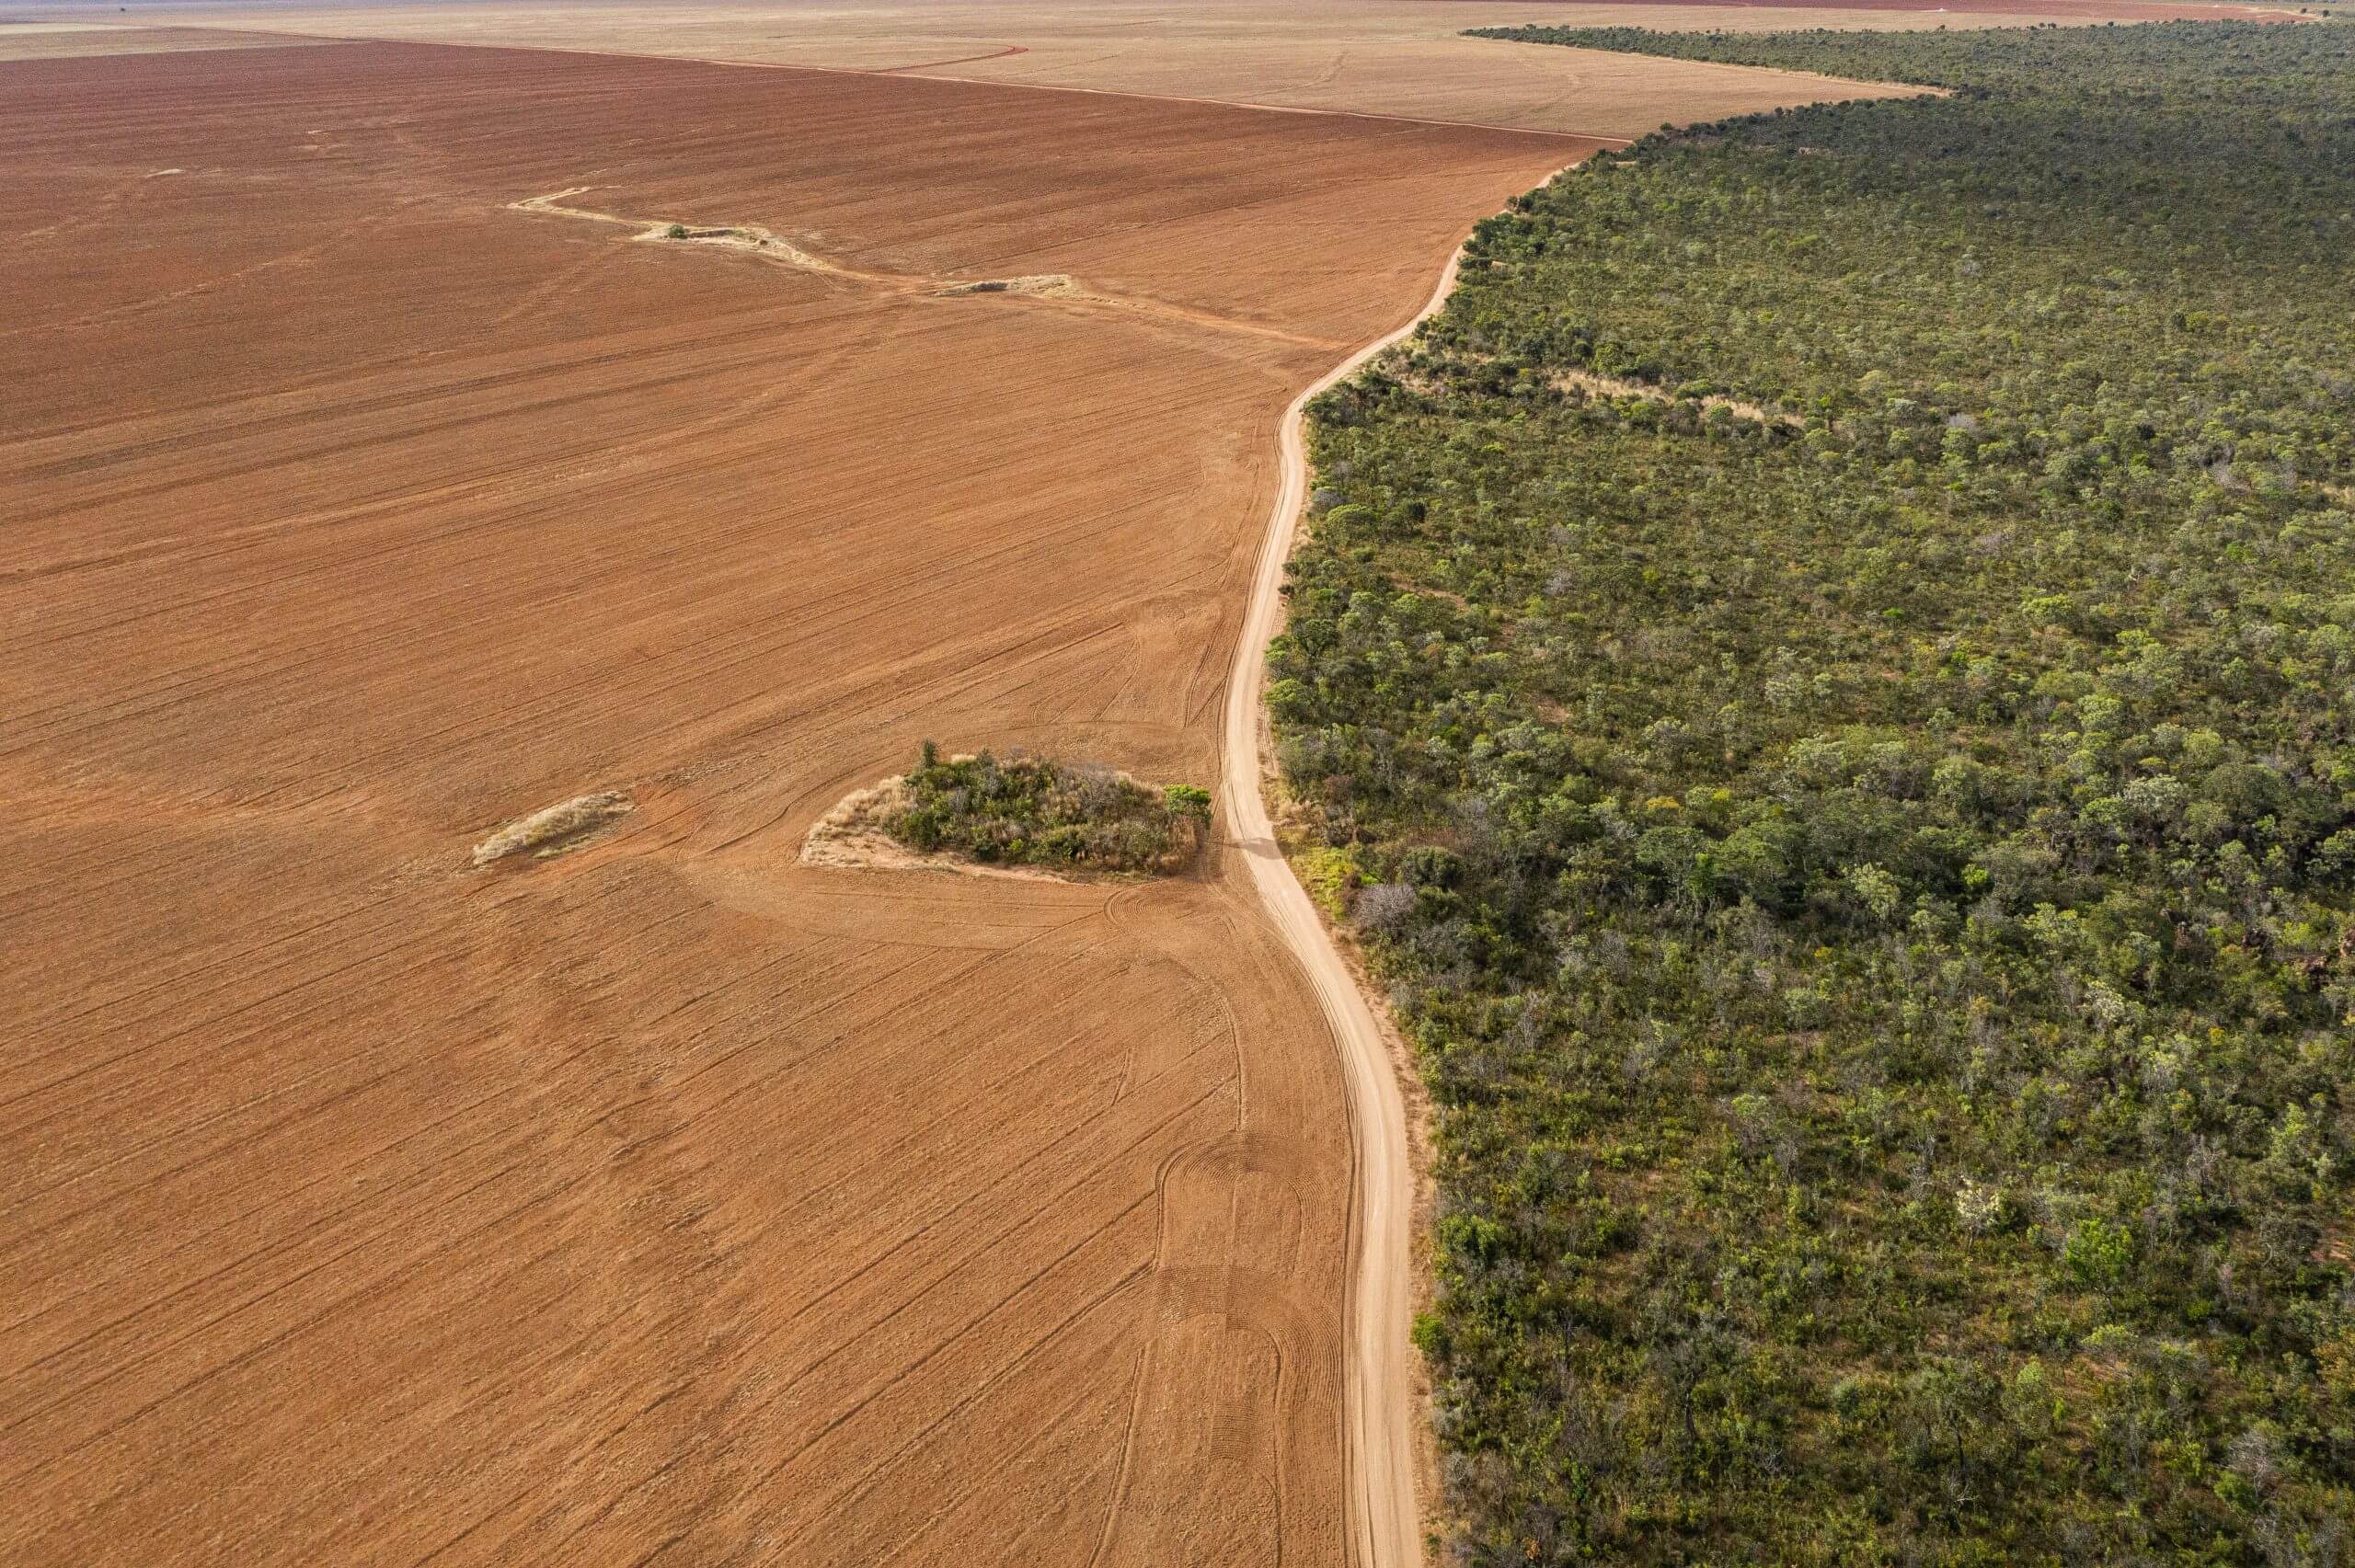 The destruction of forests to plant soy.